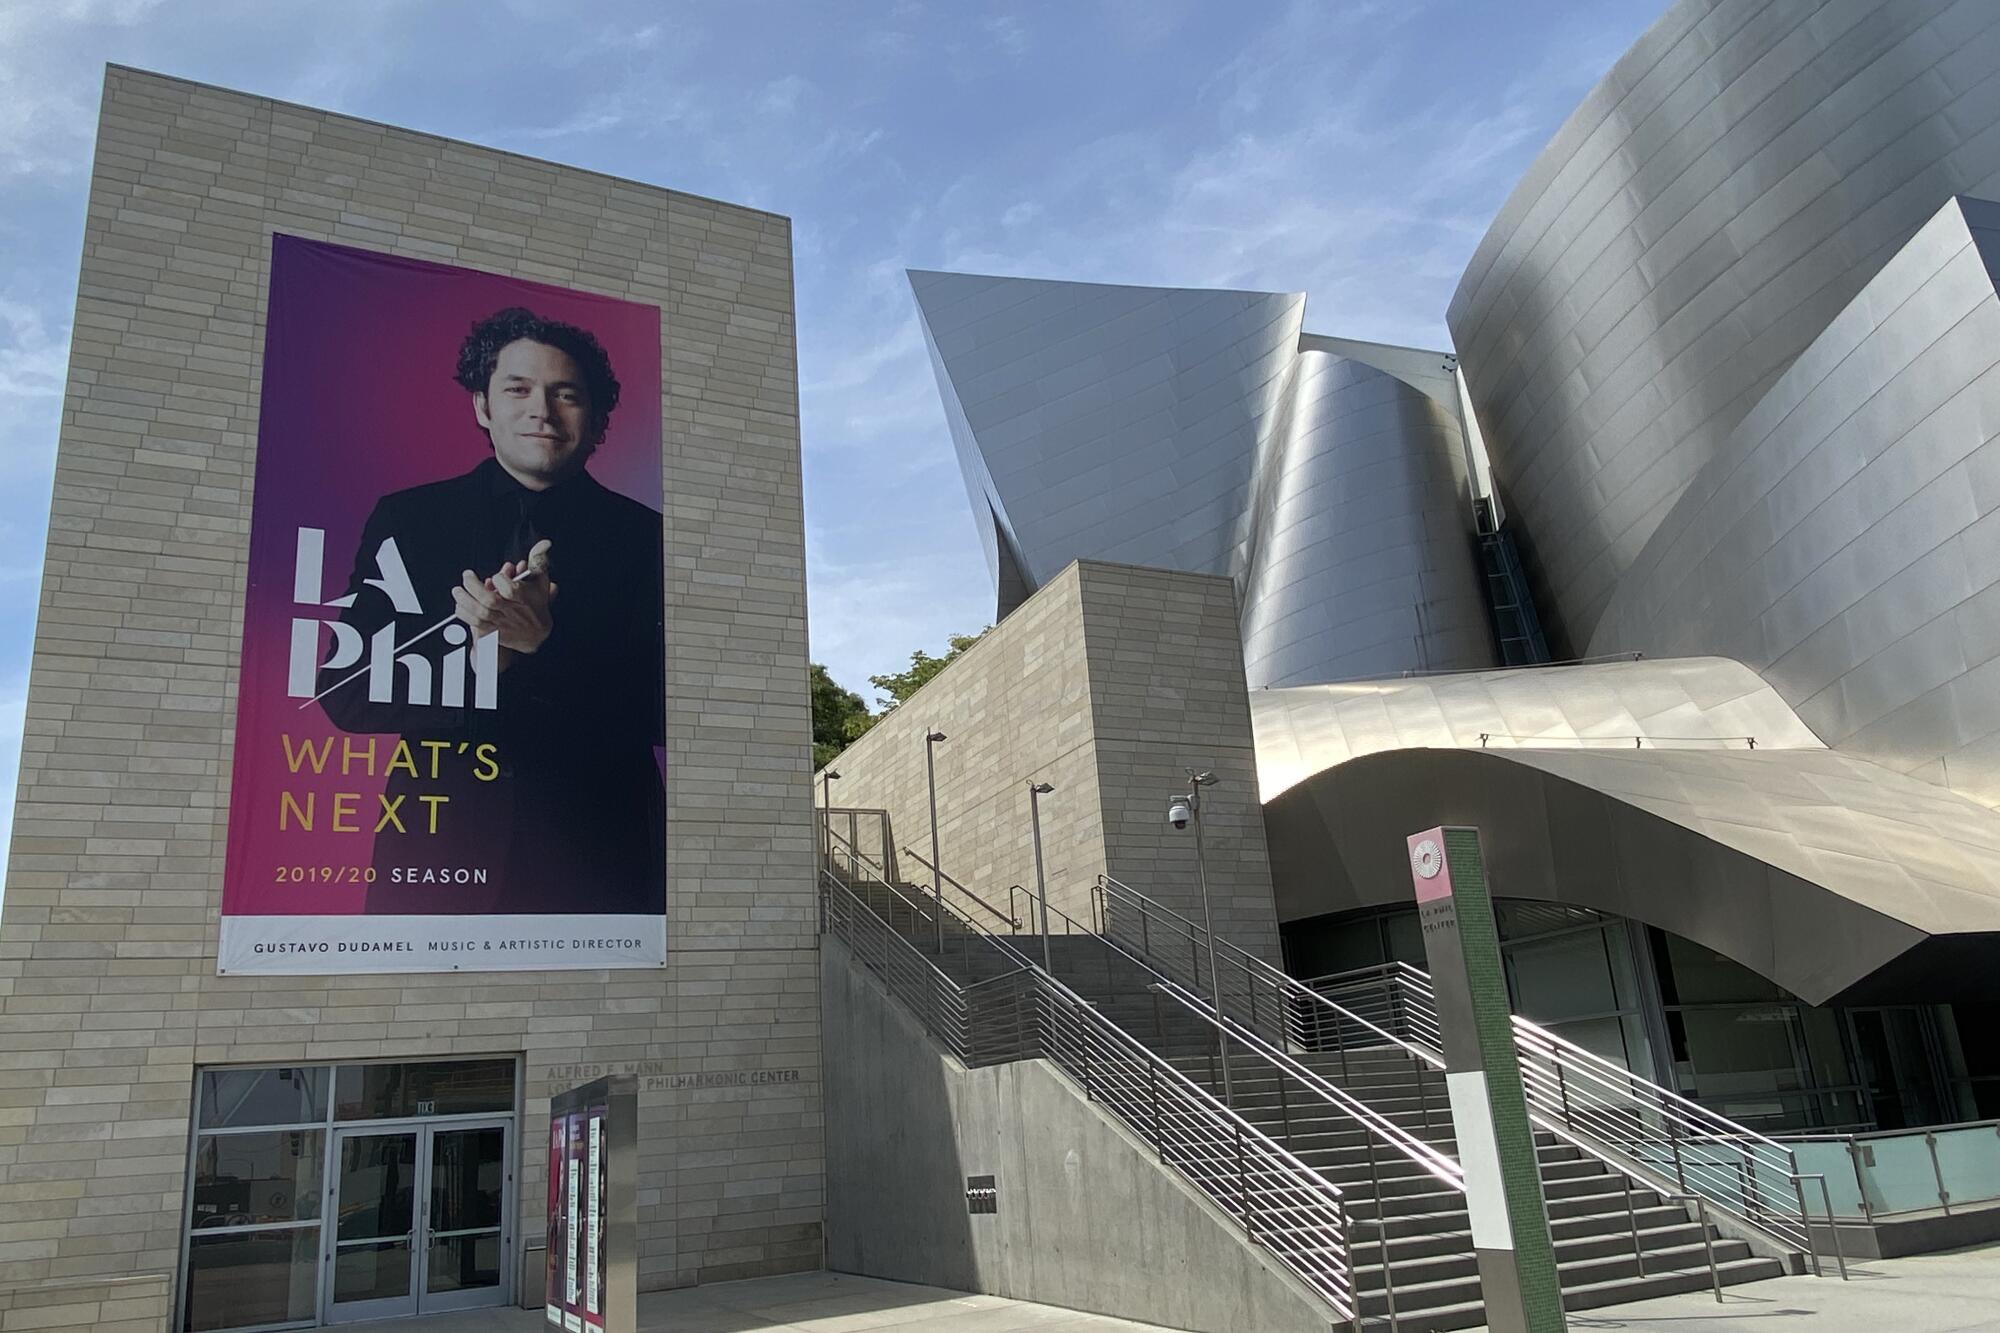 An L.A. Phil poster depicting Gustavo Dudamel is displayed outside the Walt Disney Concert Hall